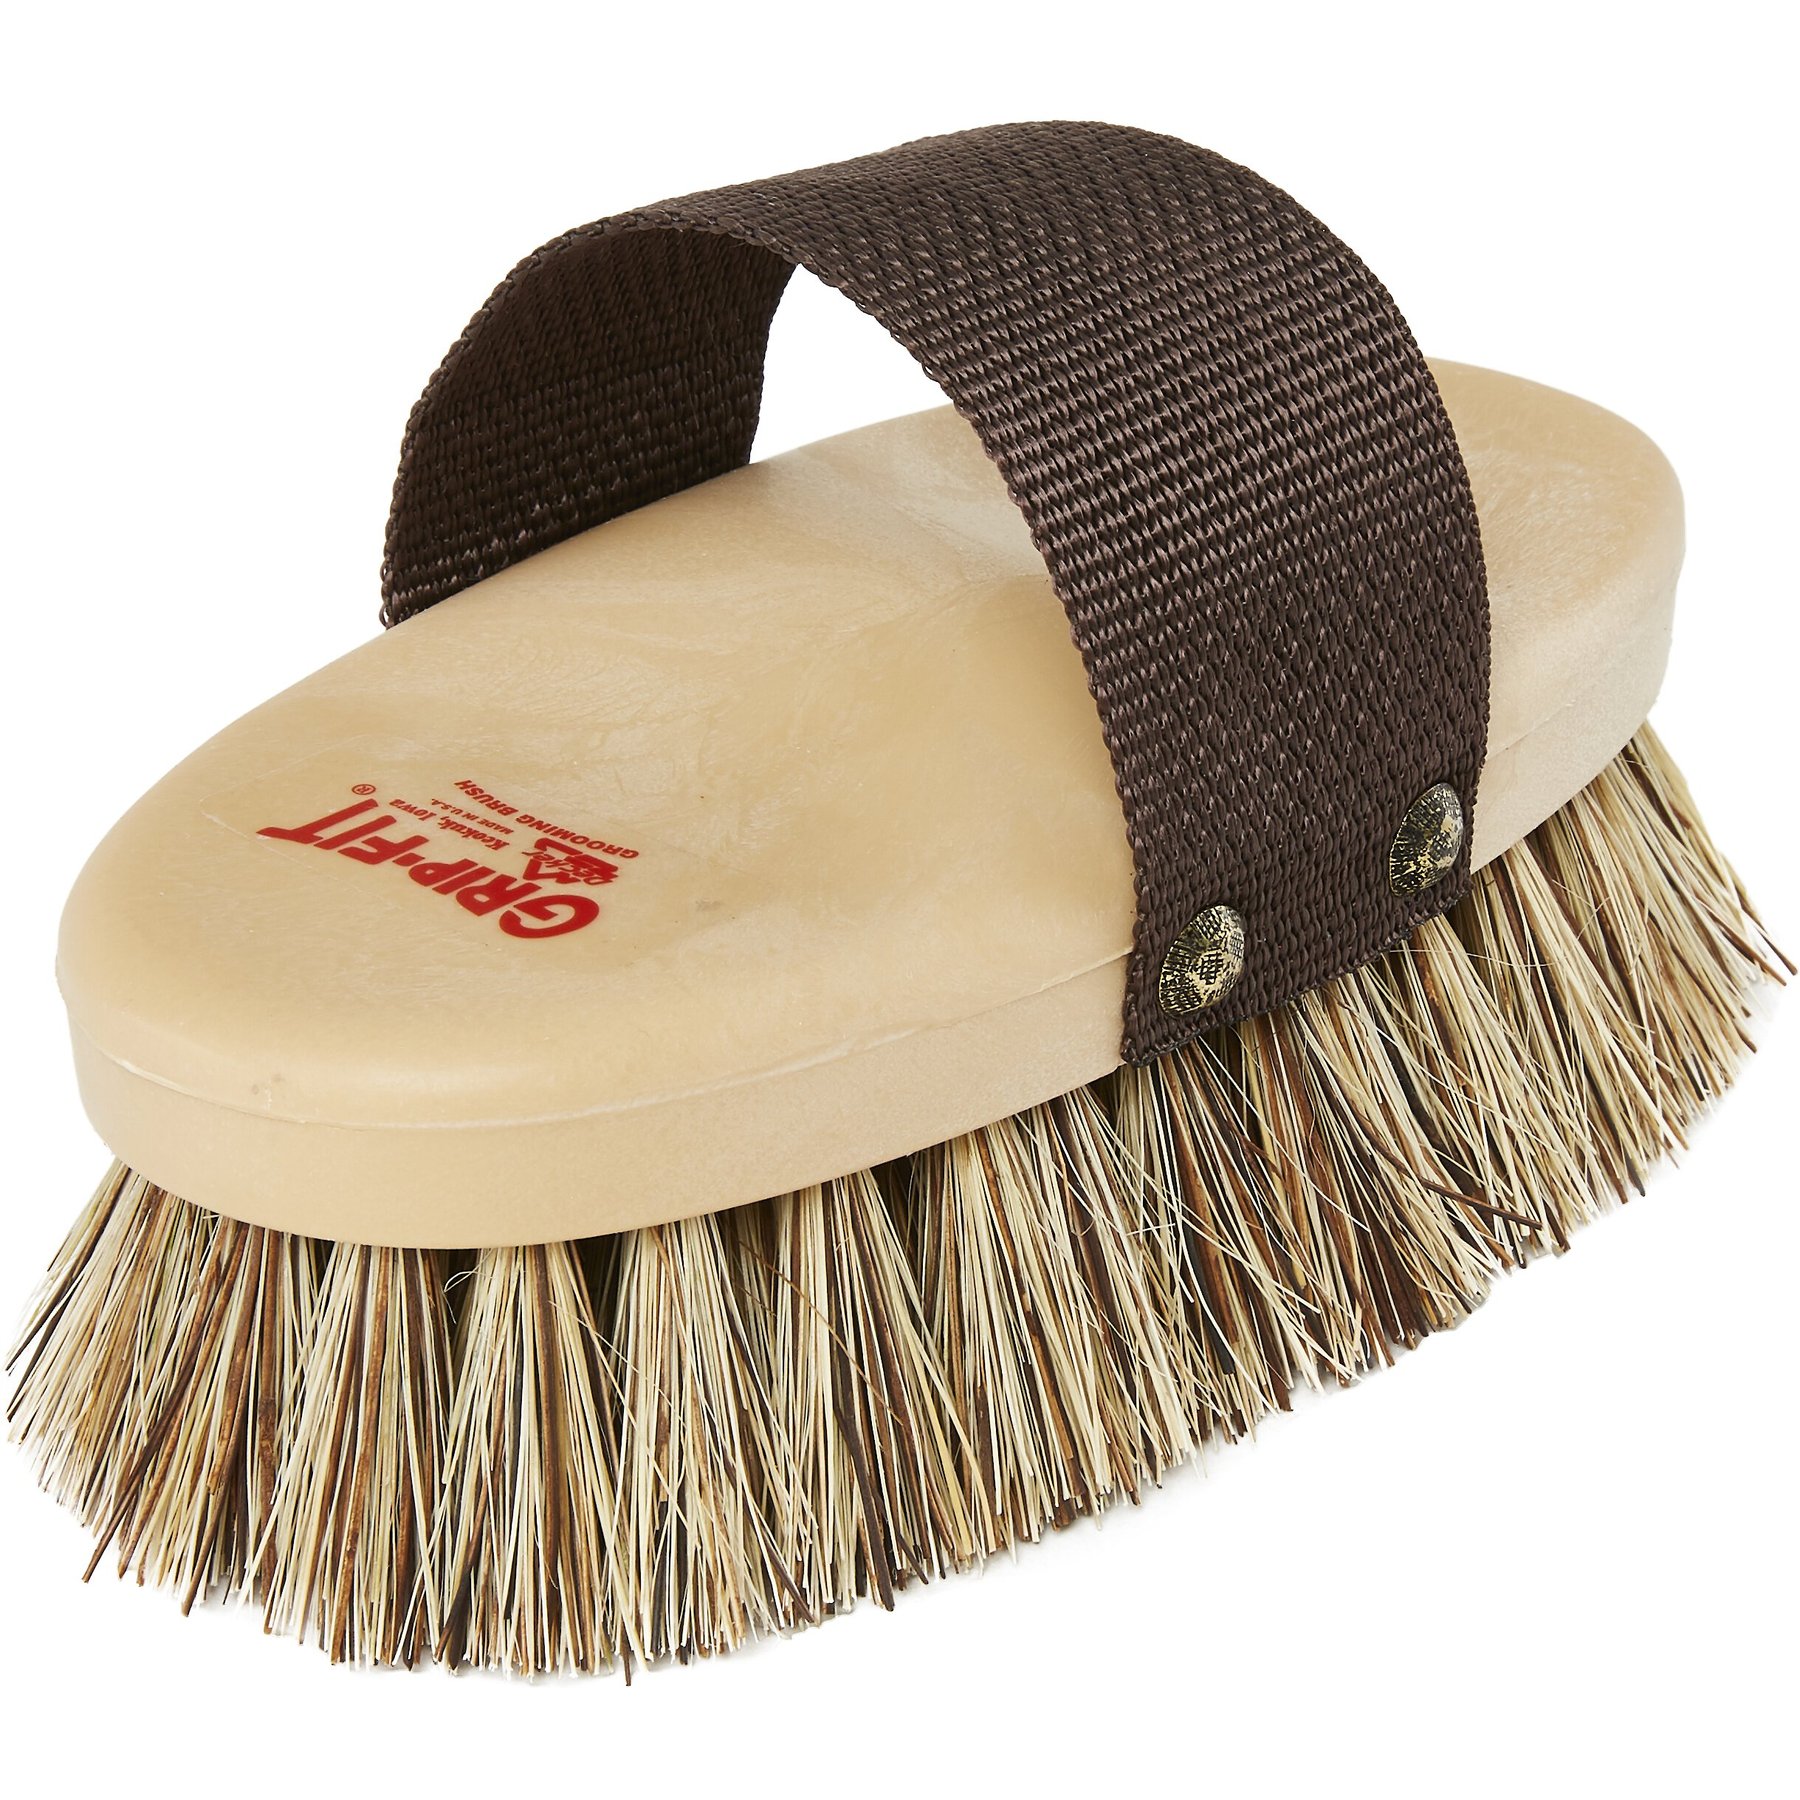 Decker™ #65 The Ultimate Grip-Fit Horse Hair Brush - Jeffers